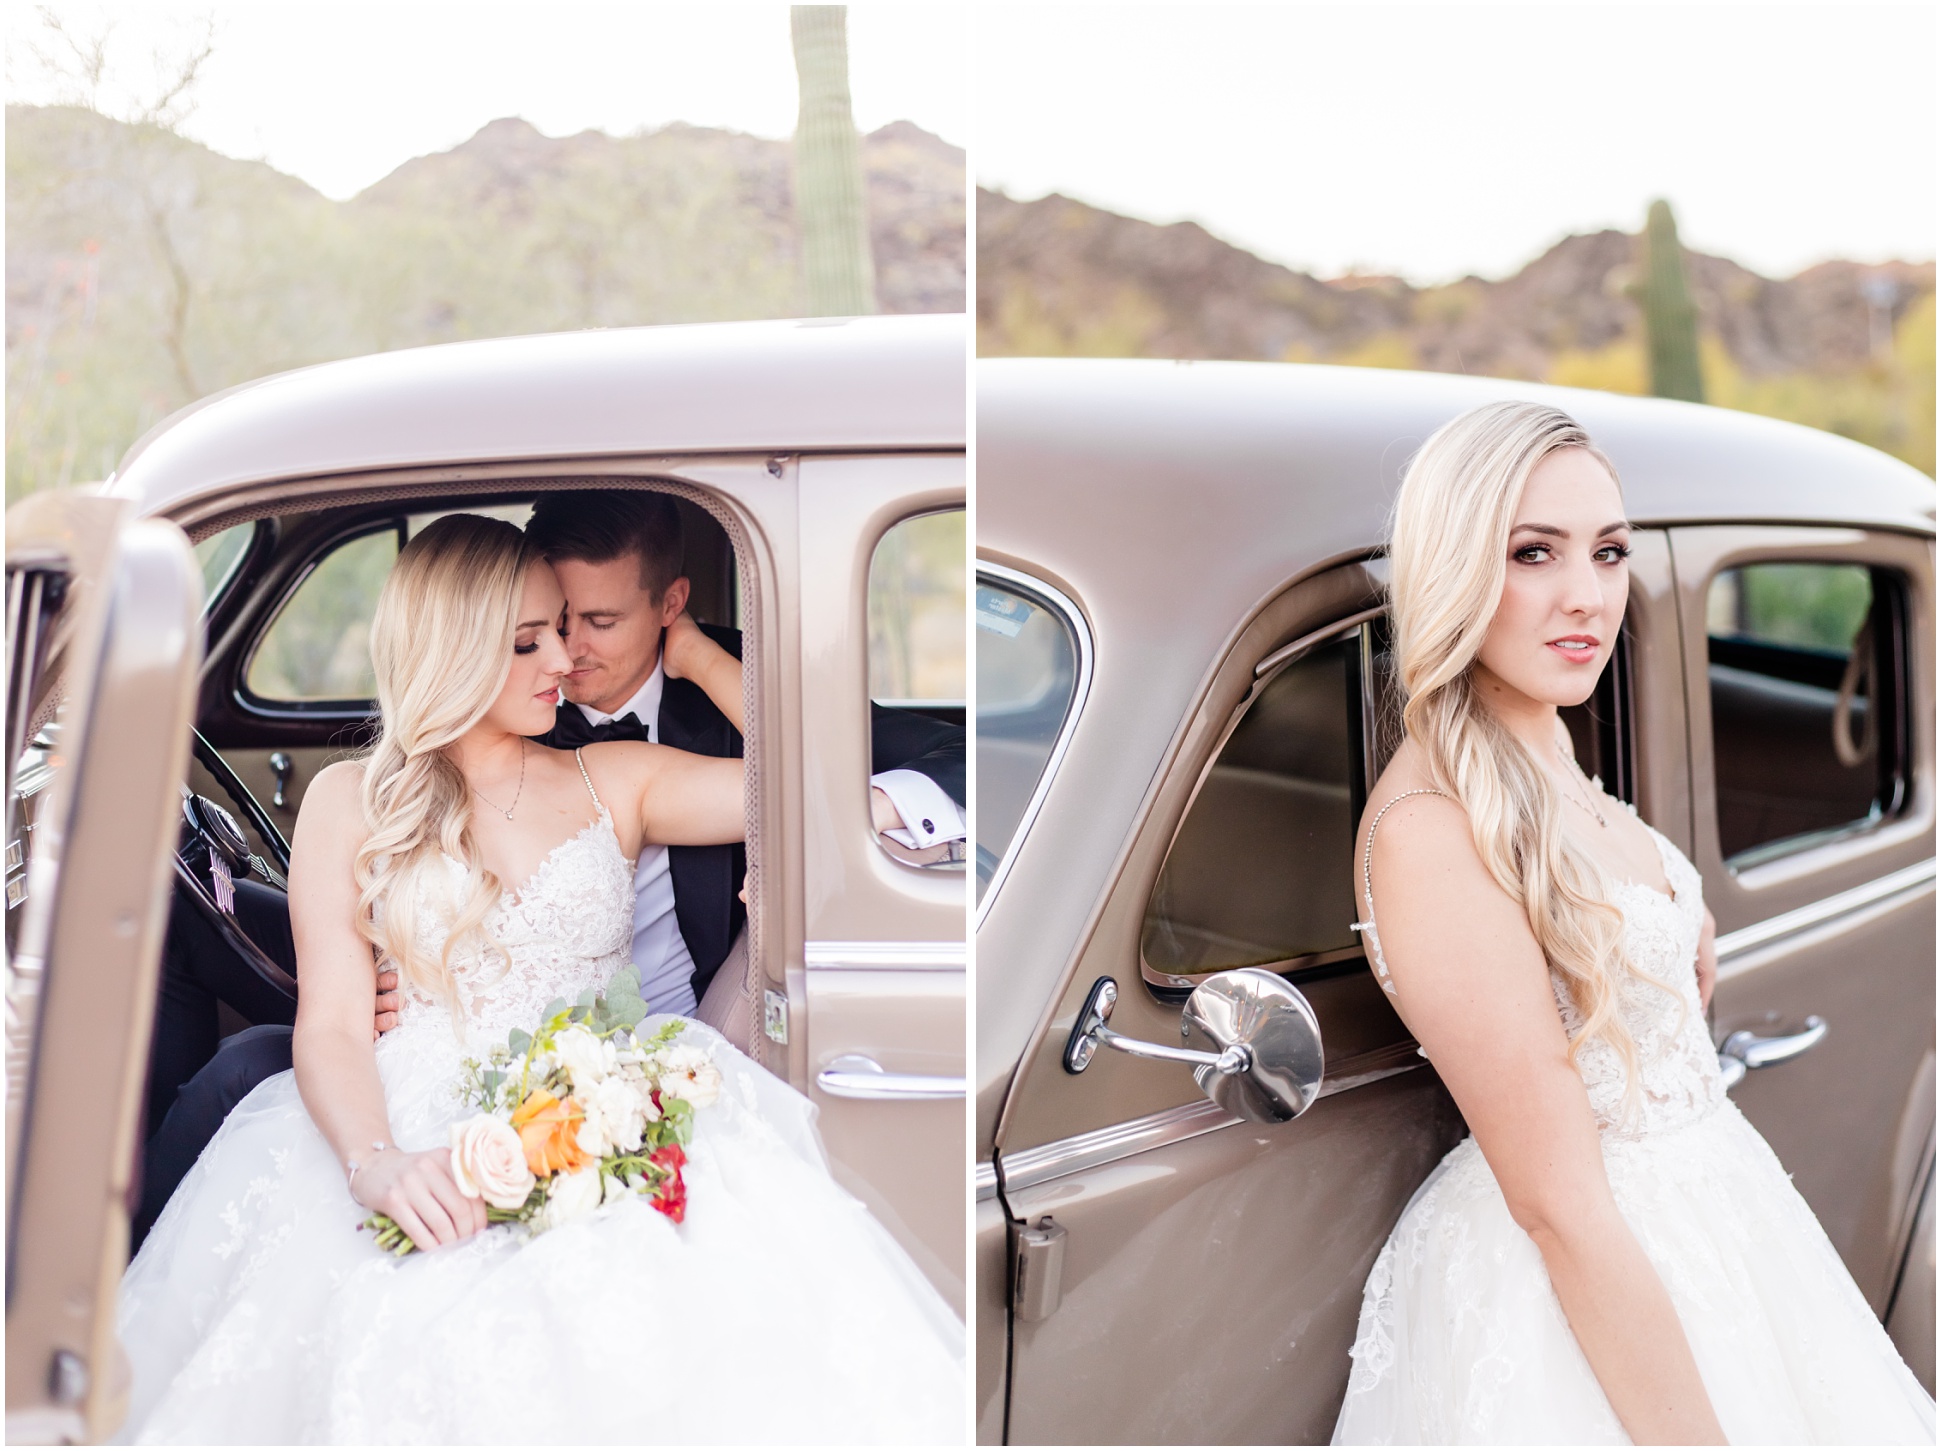 Left photo Danny and Brooklyn snuggling in drivers seat of 1937 Cadillac shot from side of car; right photo Brooklyn leaning against 1937 Cadillac in Enzoani Gown